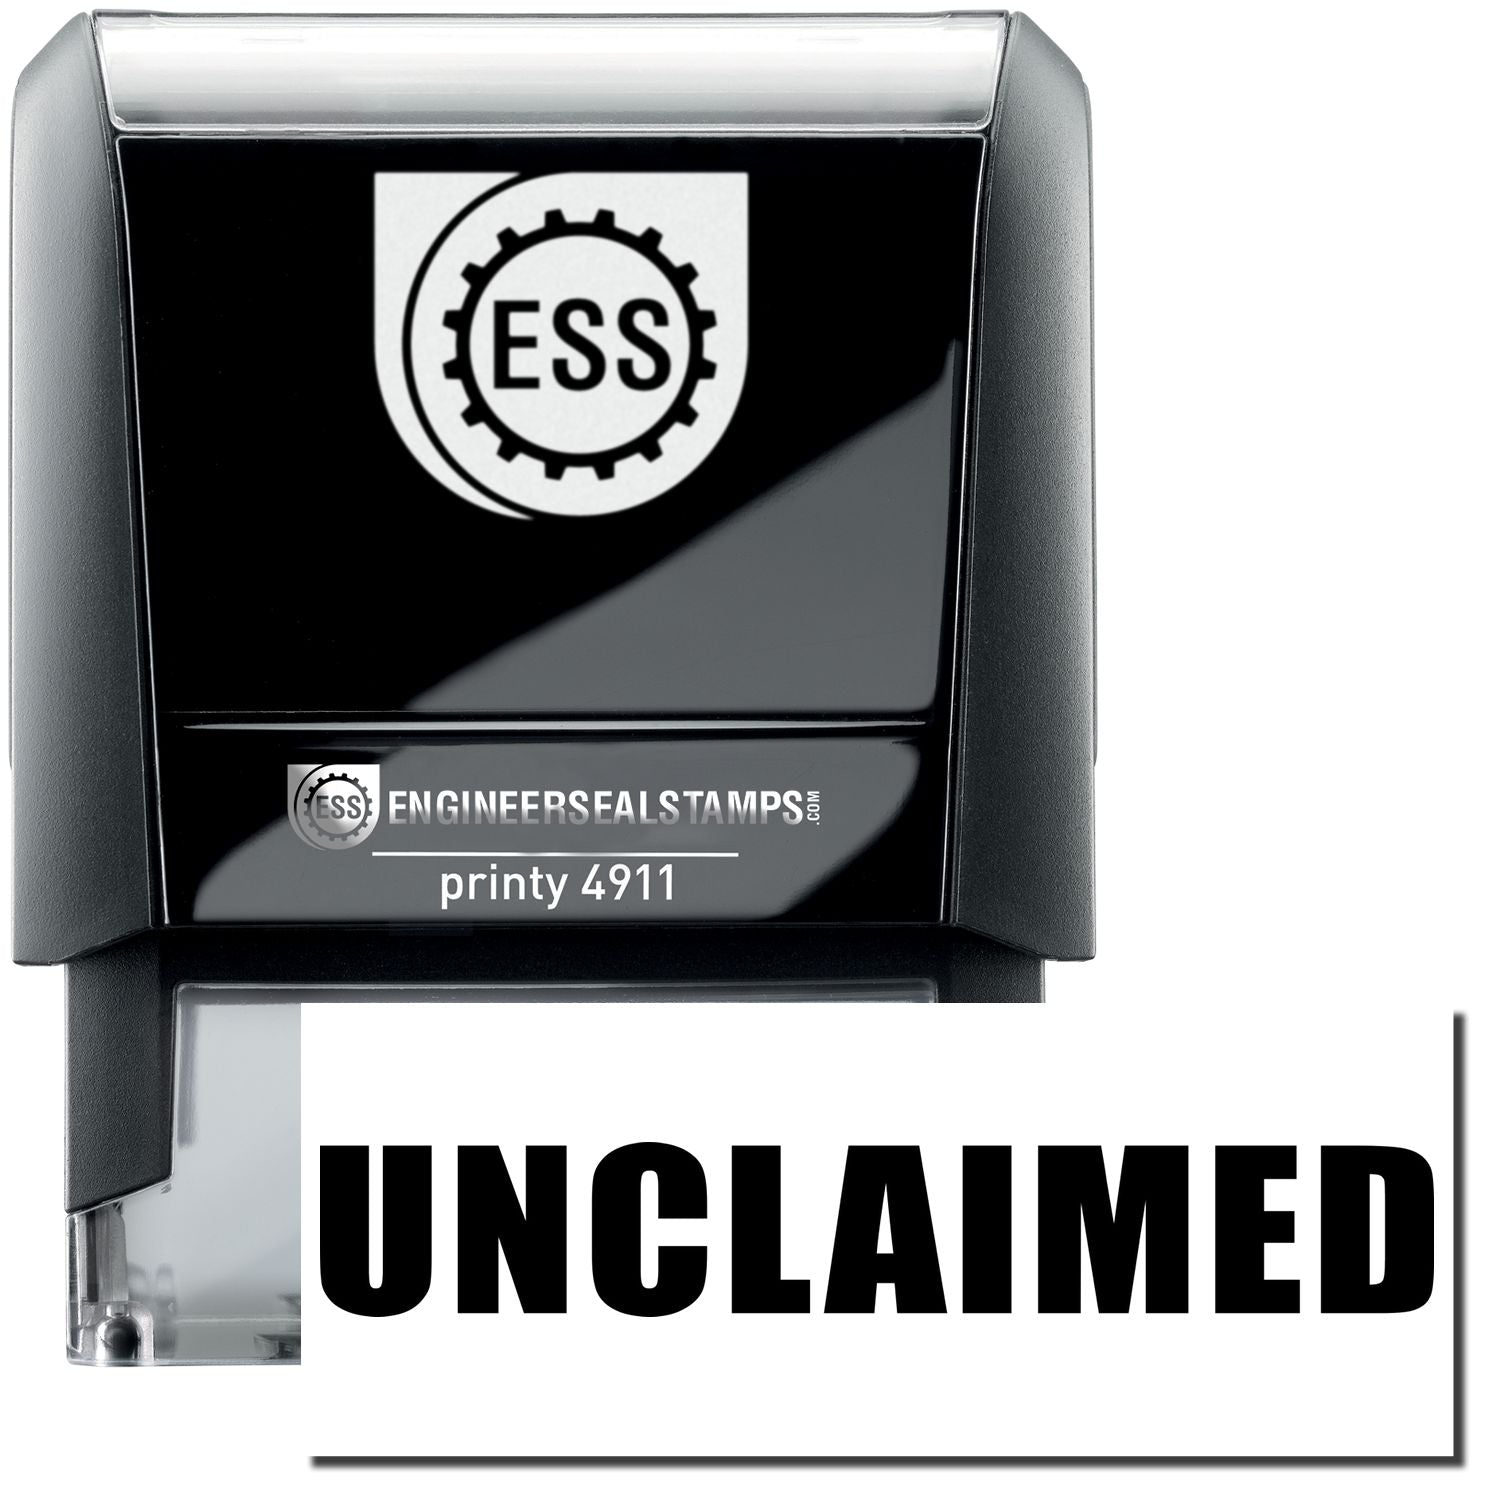 A self-inking stamp with a stamped image showing how the text "UNCLAIMED" is displayed after stamping.